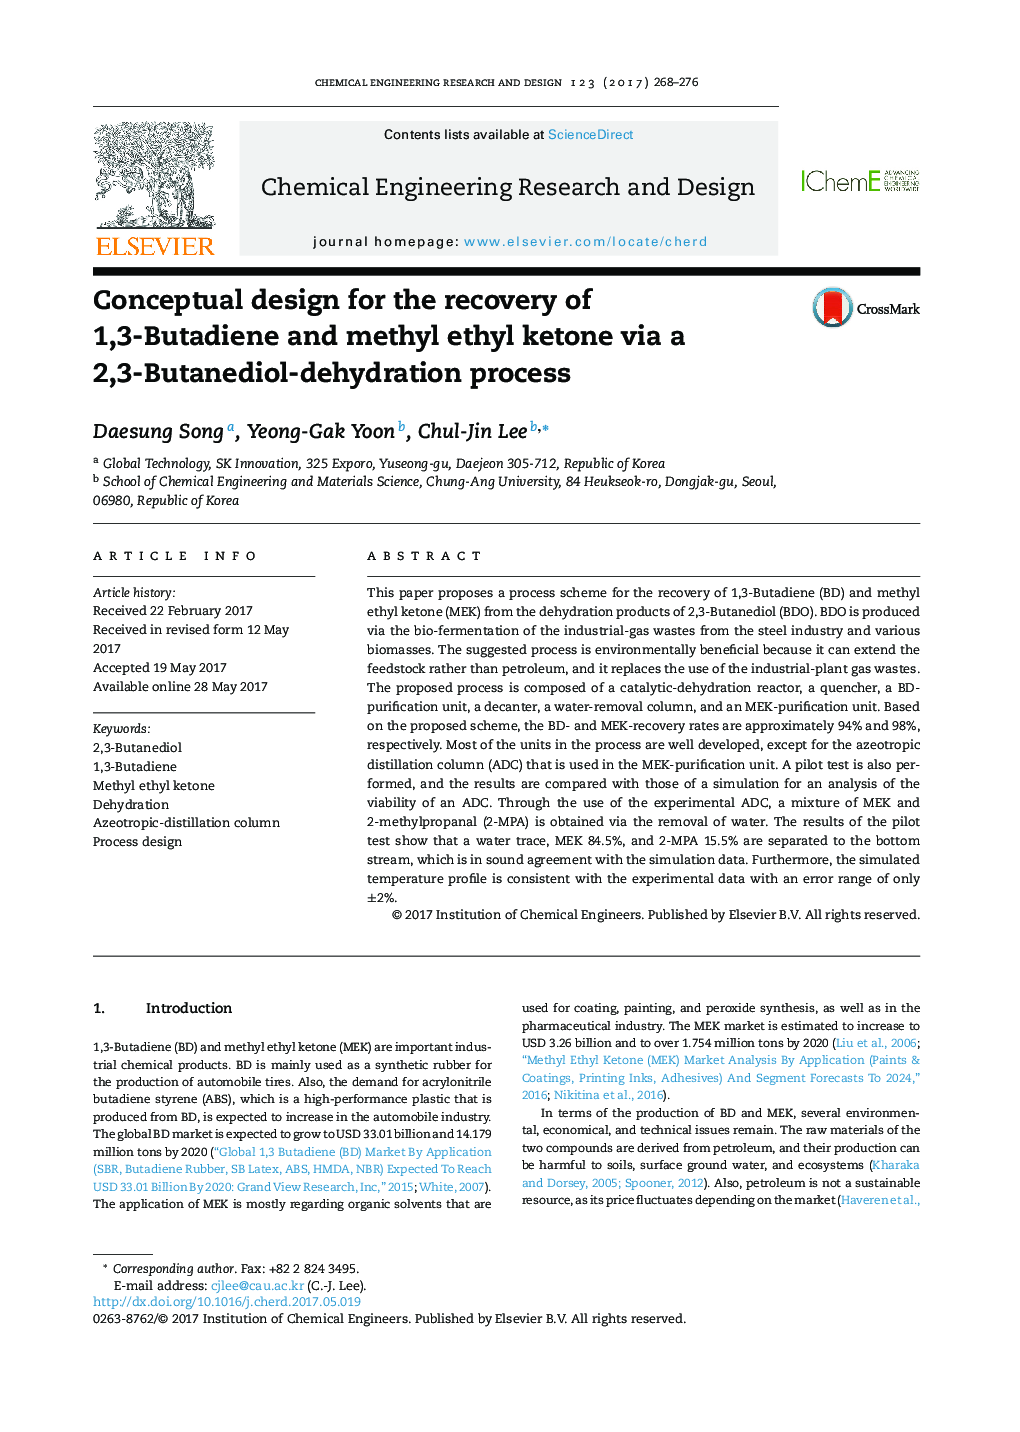 Conceptual design for the recovery of 1,3-Butadiene and methyl ethyl ketone via a 2,3-Butanediol-dehydration process